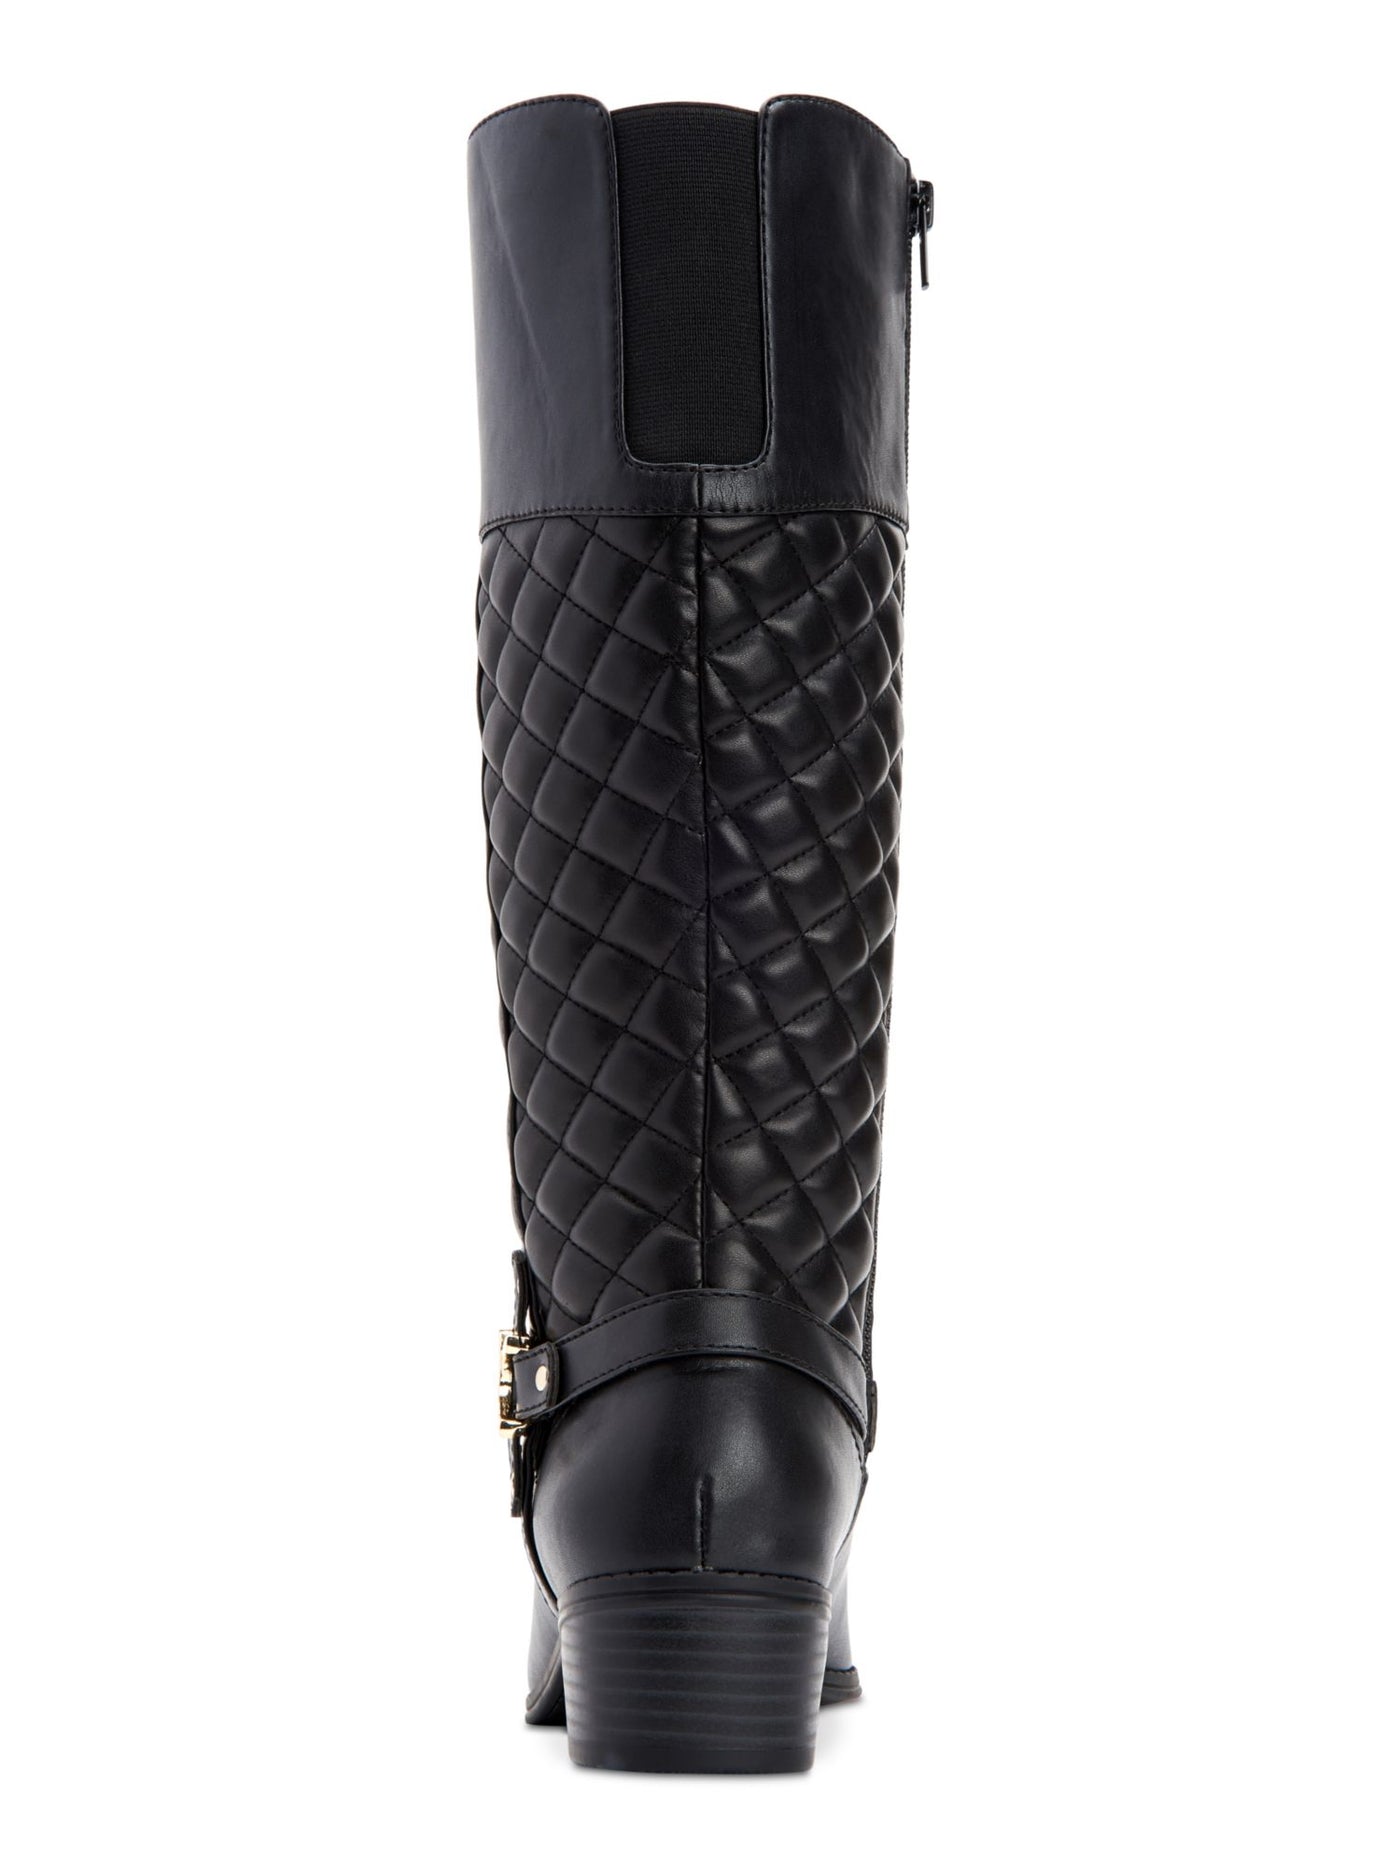 CHARTER CLUB Womens Black Quilted Helenn Round Toe Block Heel Zip-Up Riding Boot 11 M